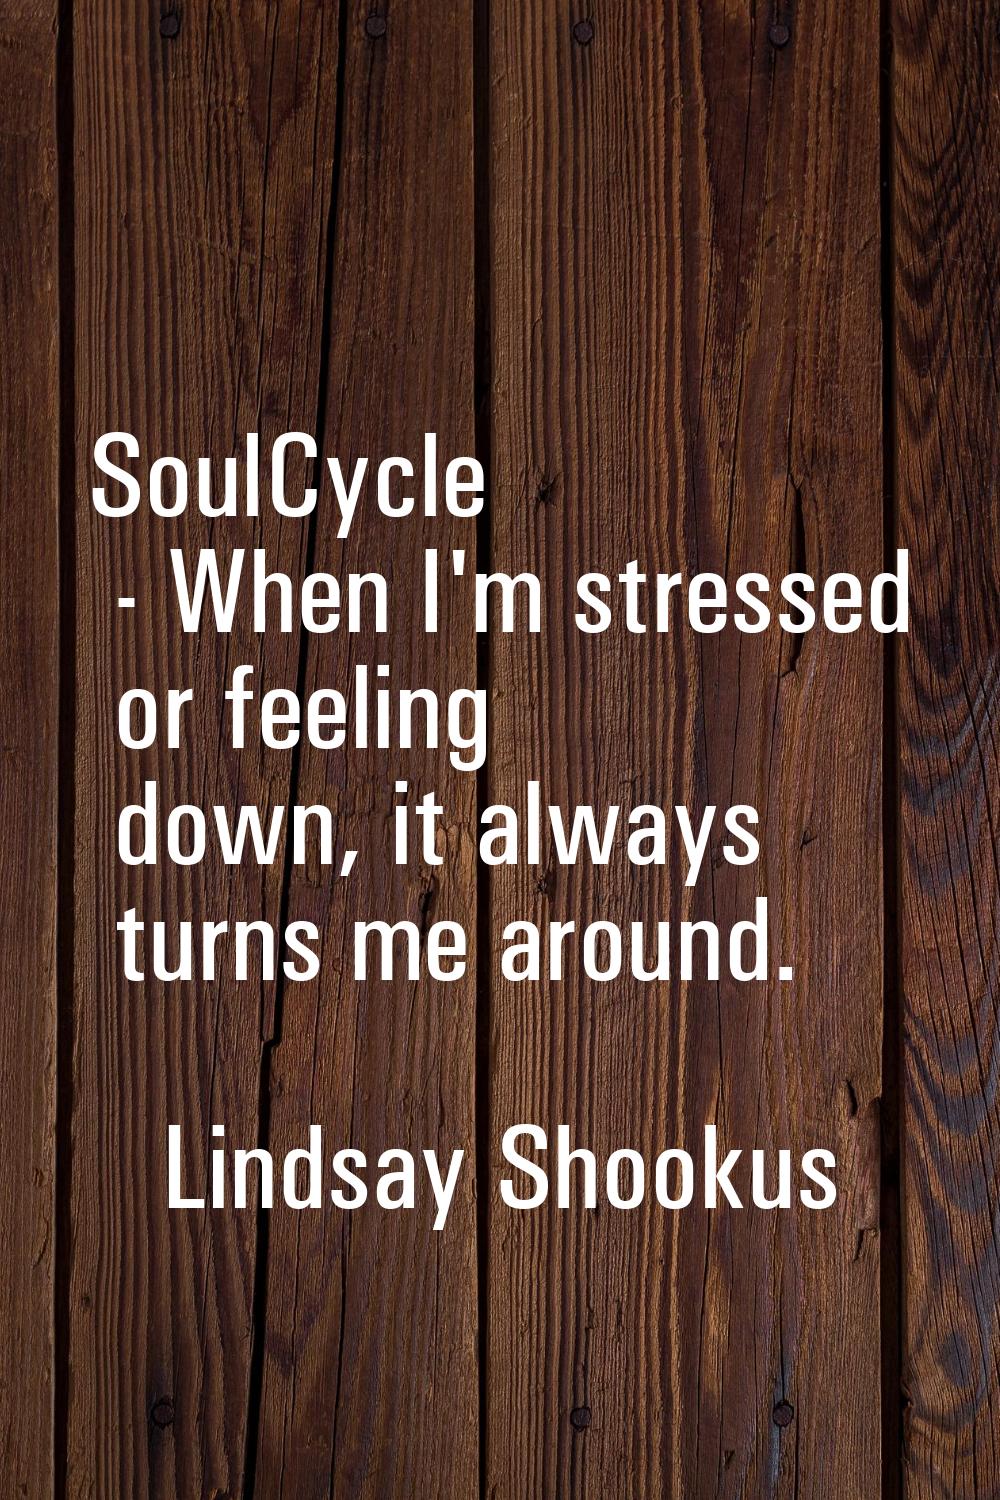 SoulCycle - When I'm stressed or feeling down, it always turns me around.